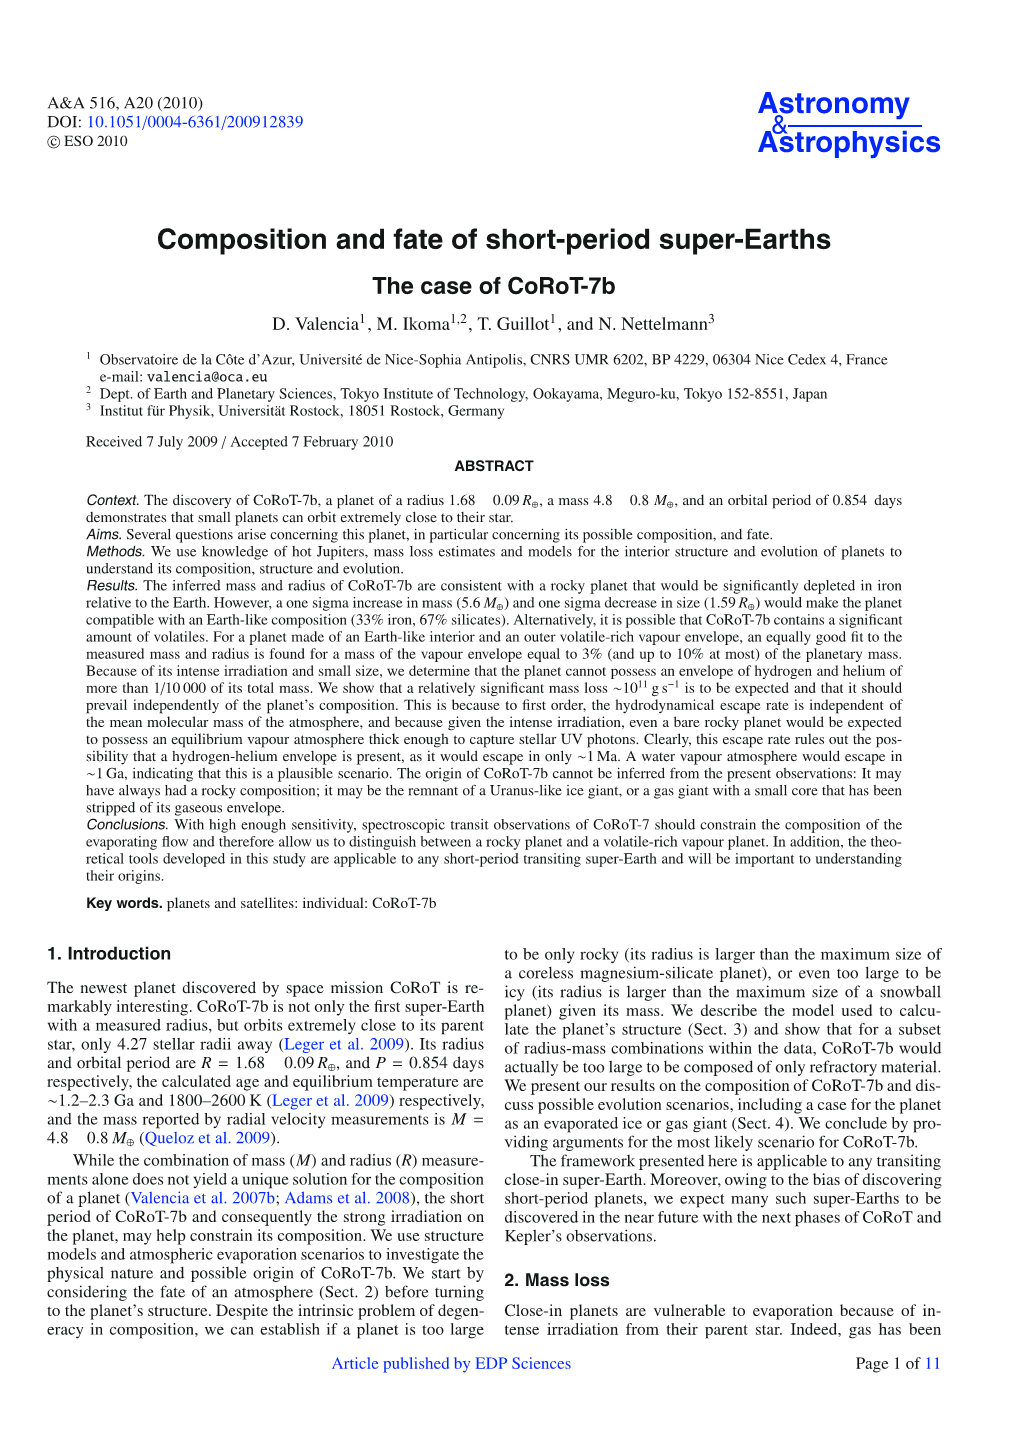 Composition and Fate of Short-Period Super-Earths the Case of Corot-7B D